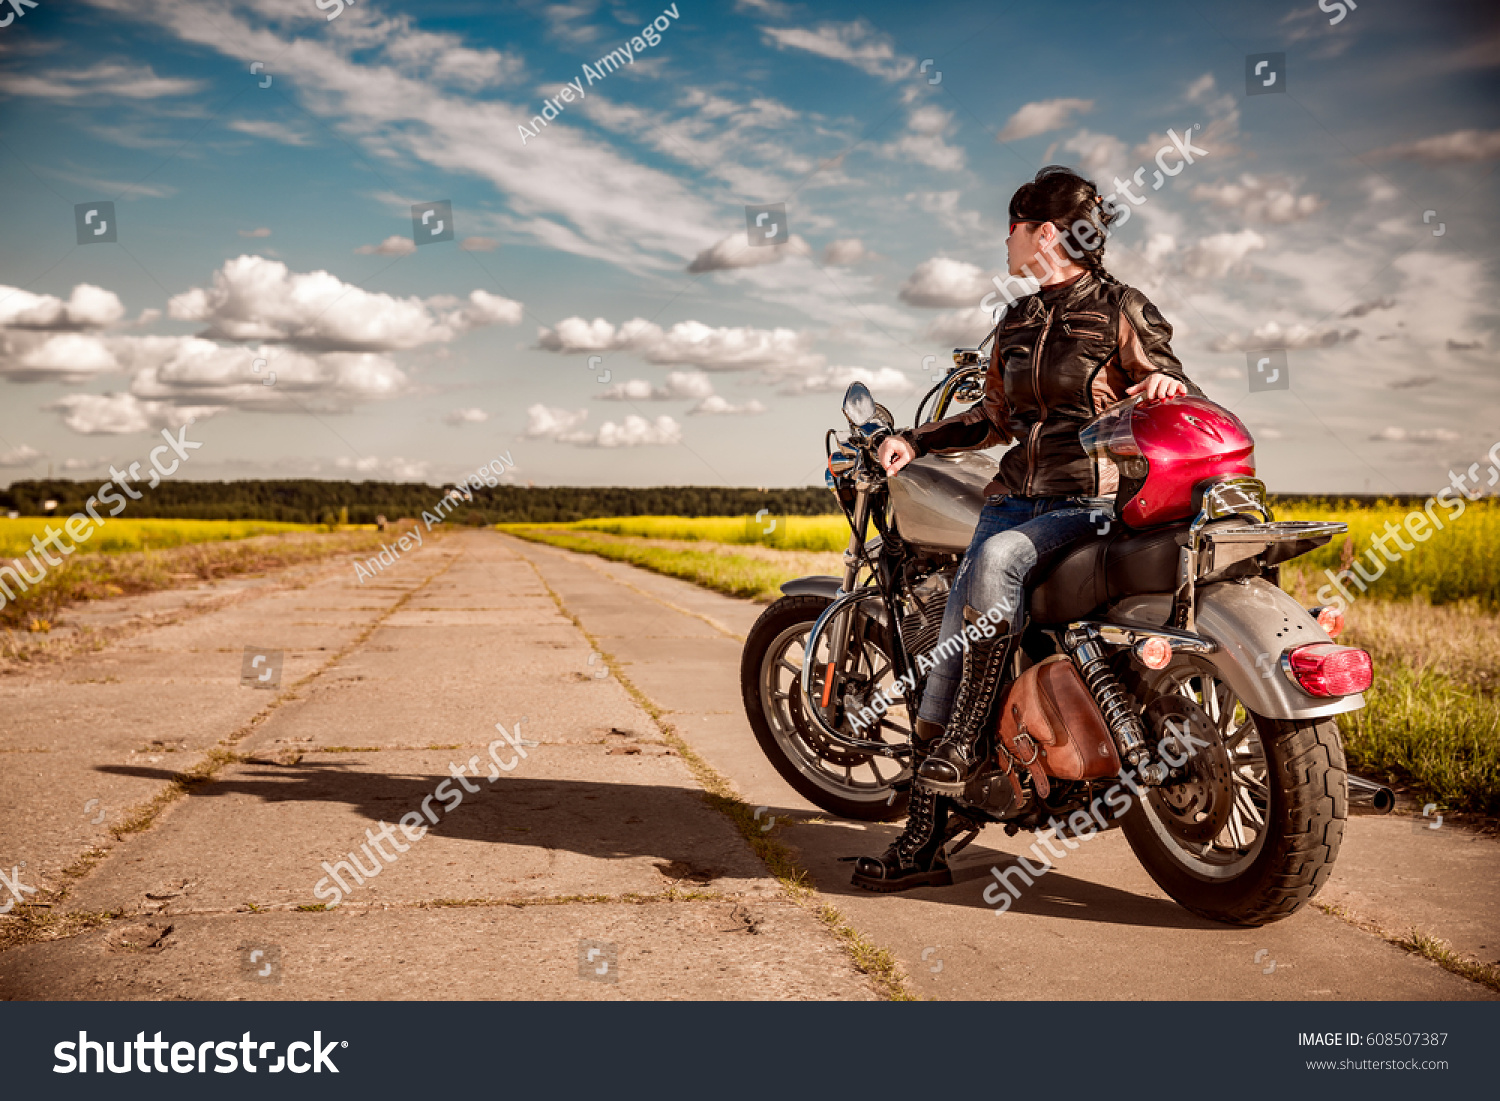 Biker girl in a leather jacket on a motorcycle #608507387